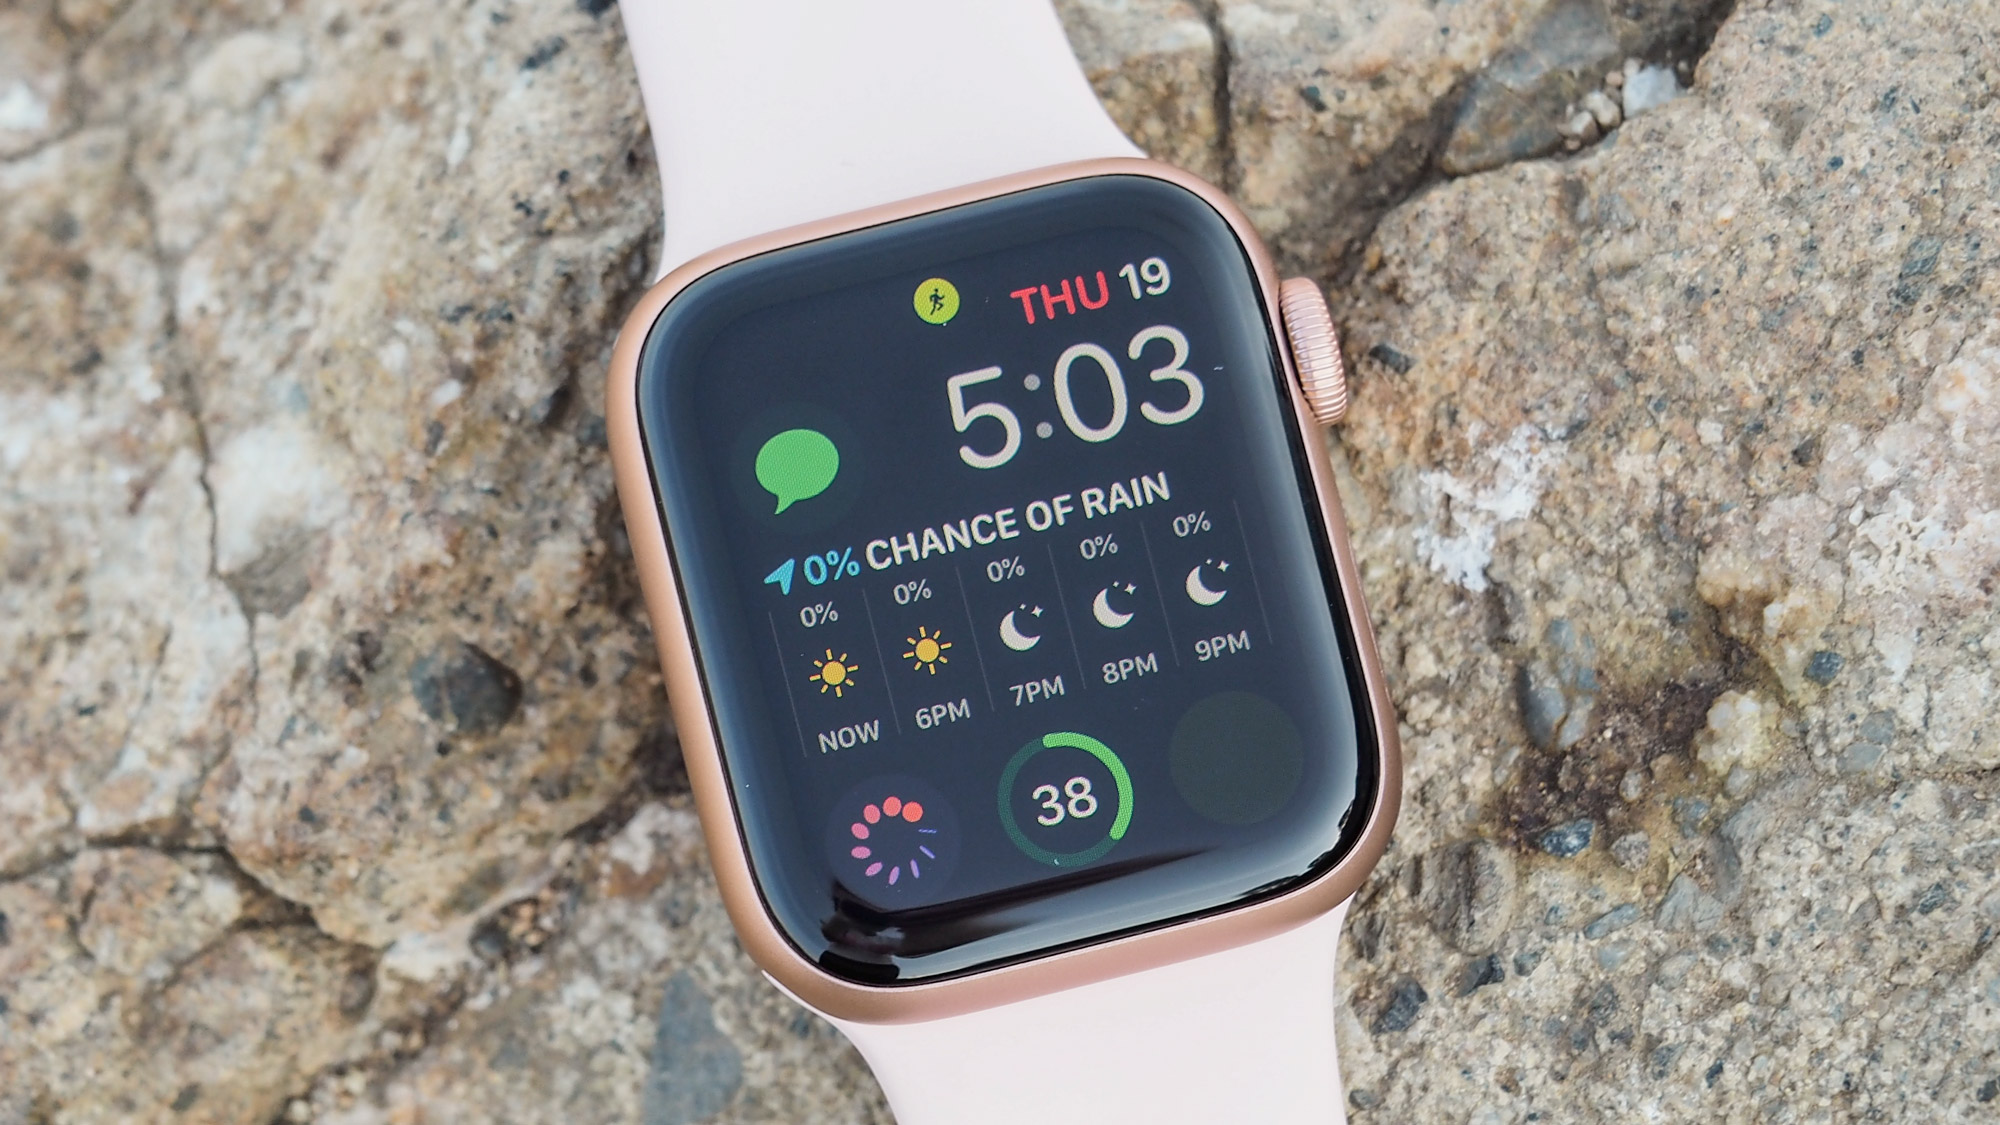 Apple Watch Series 5: Recommended